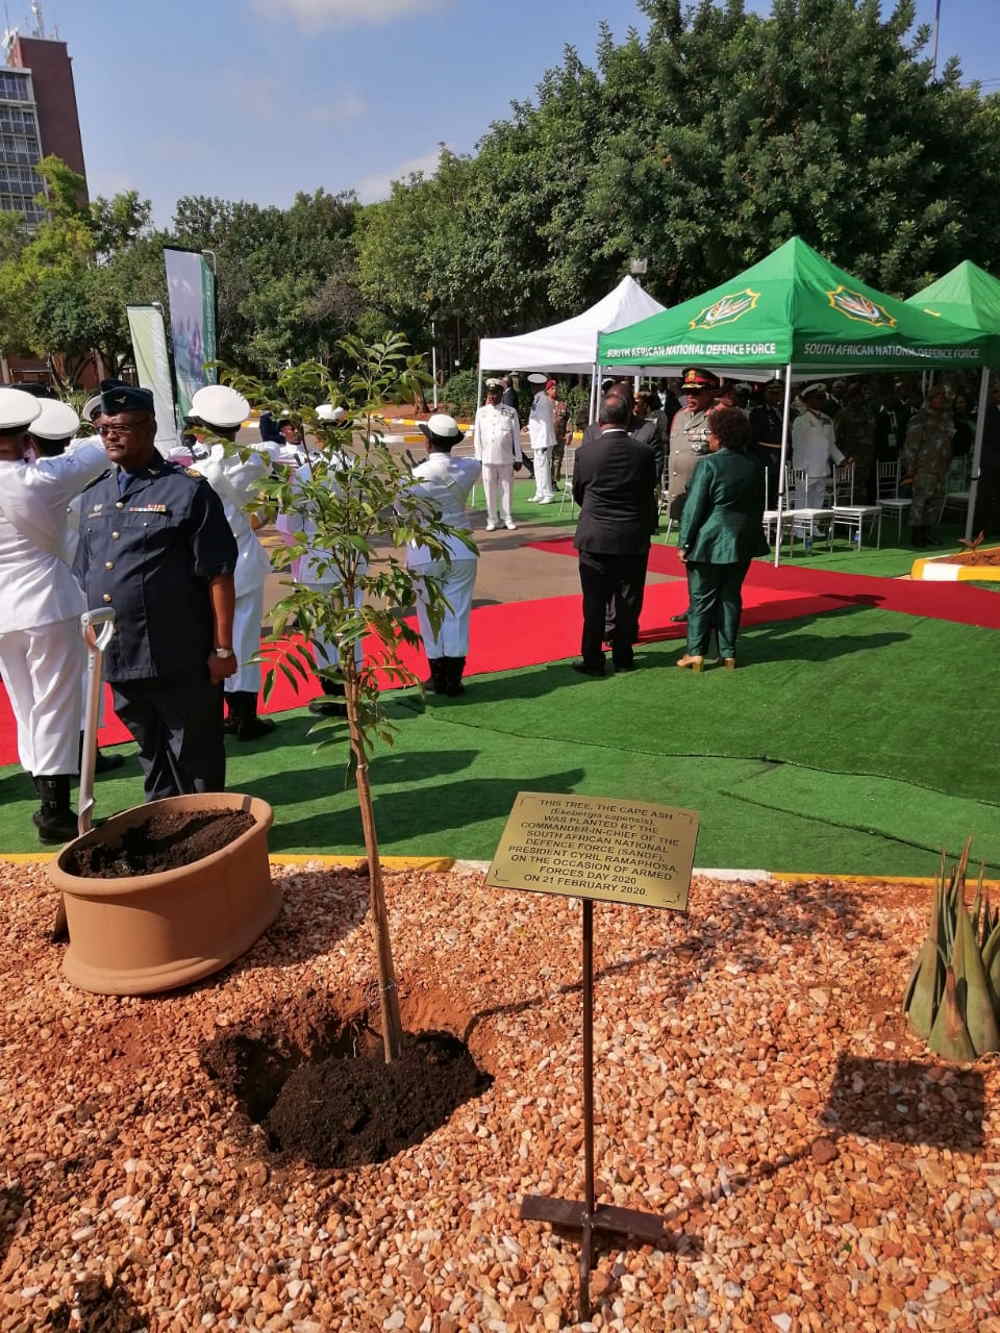 Cyril Ramaphosa Plant Trees Not Bombs Campaign